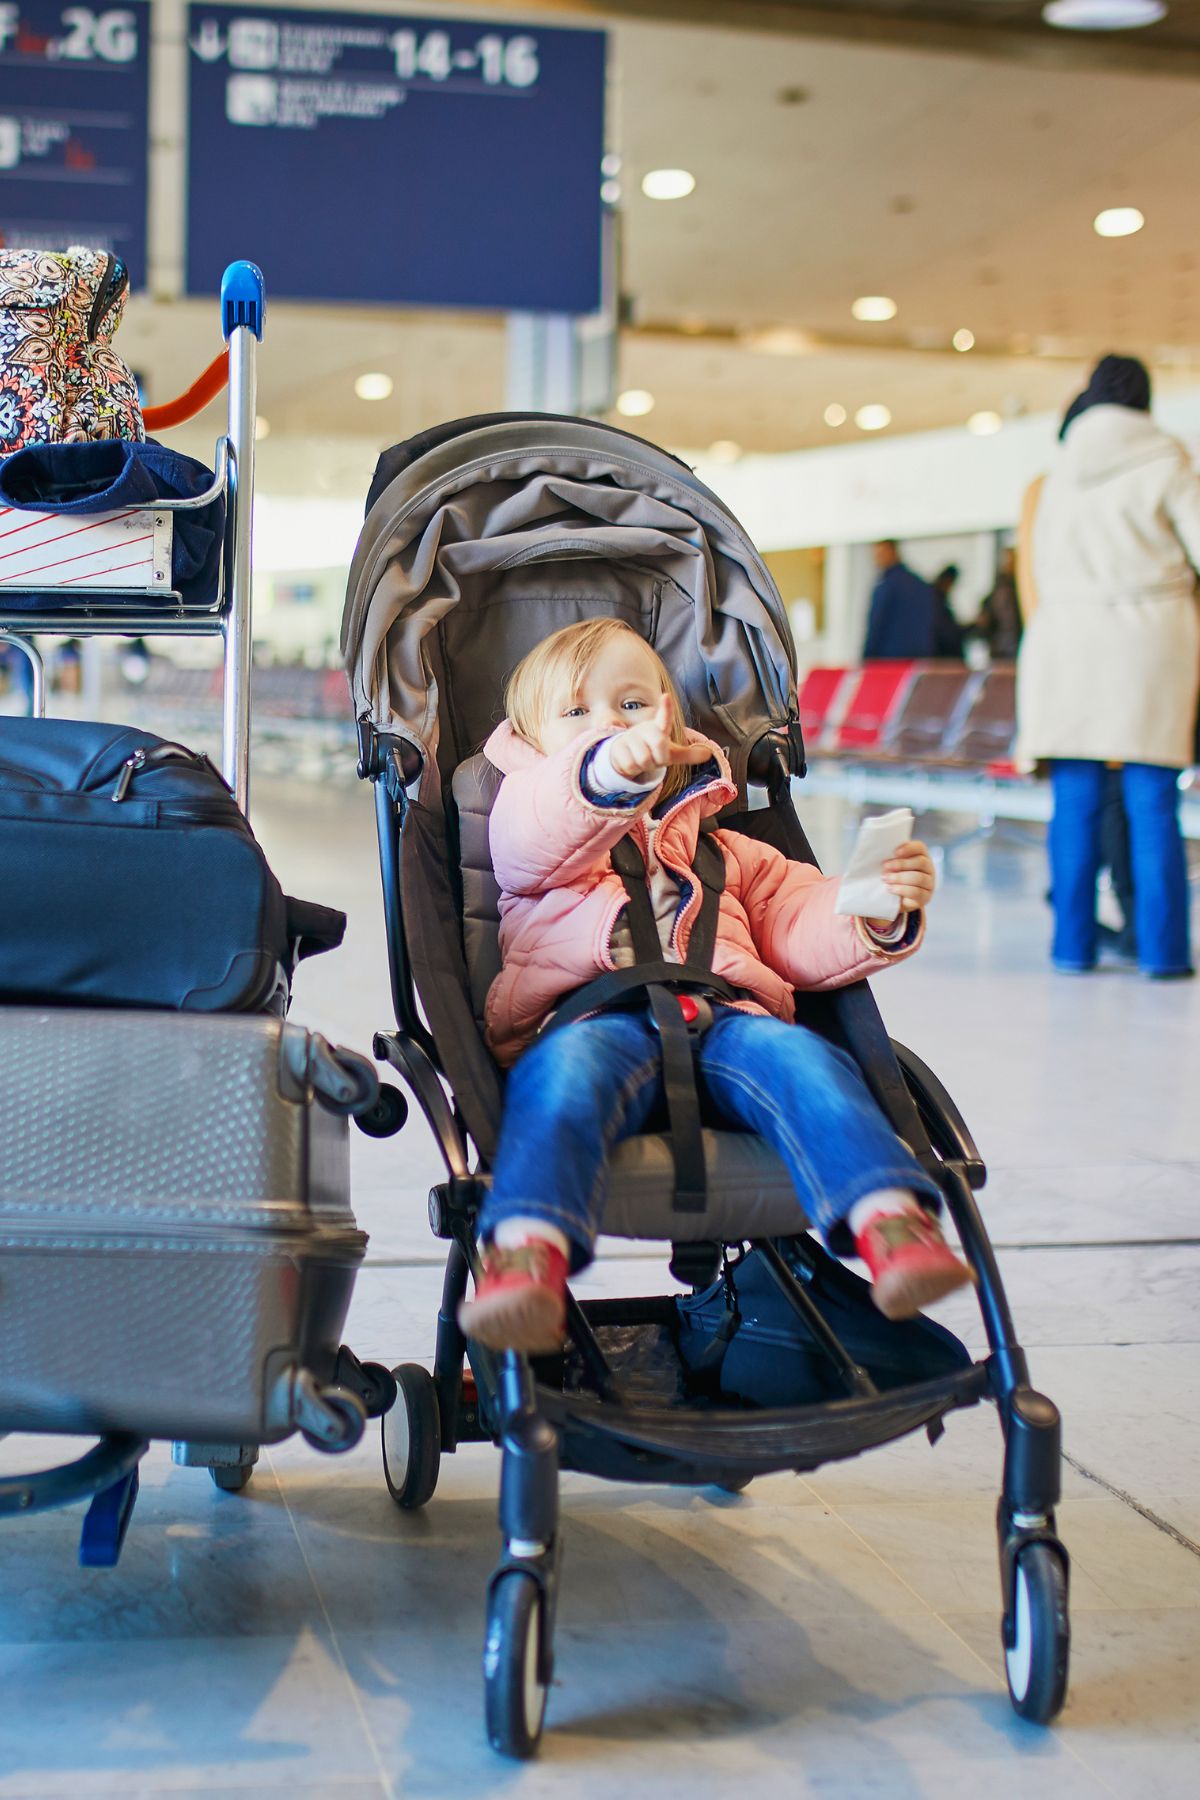 Toddler in a stroller next to cart of luggage in an airport.